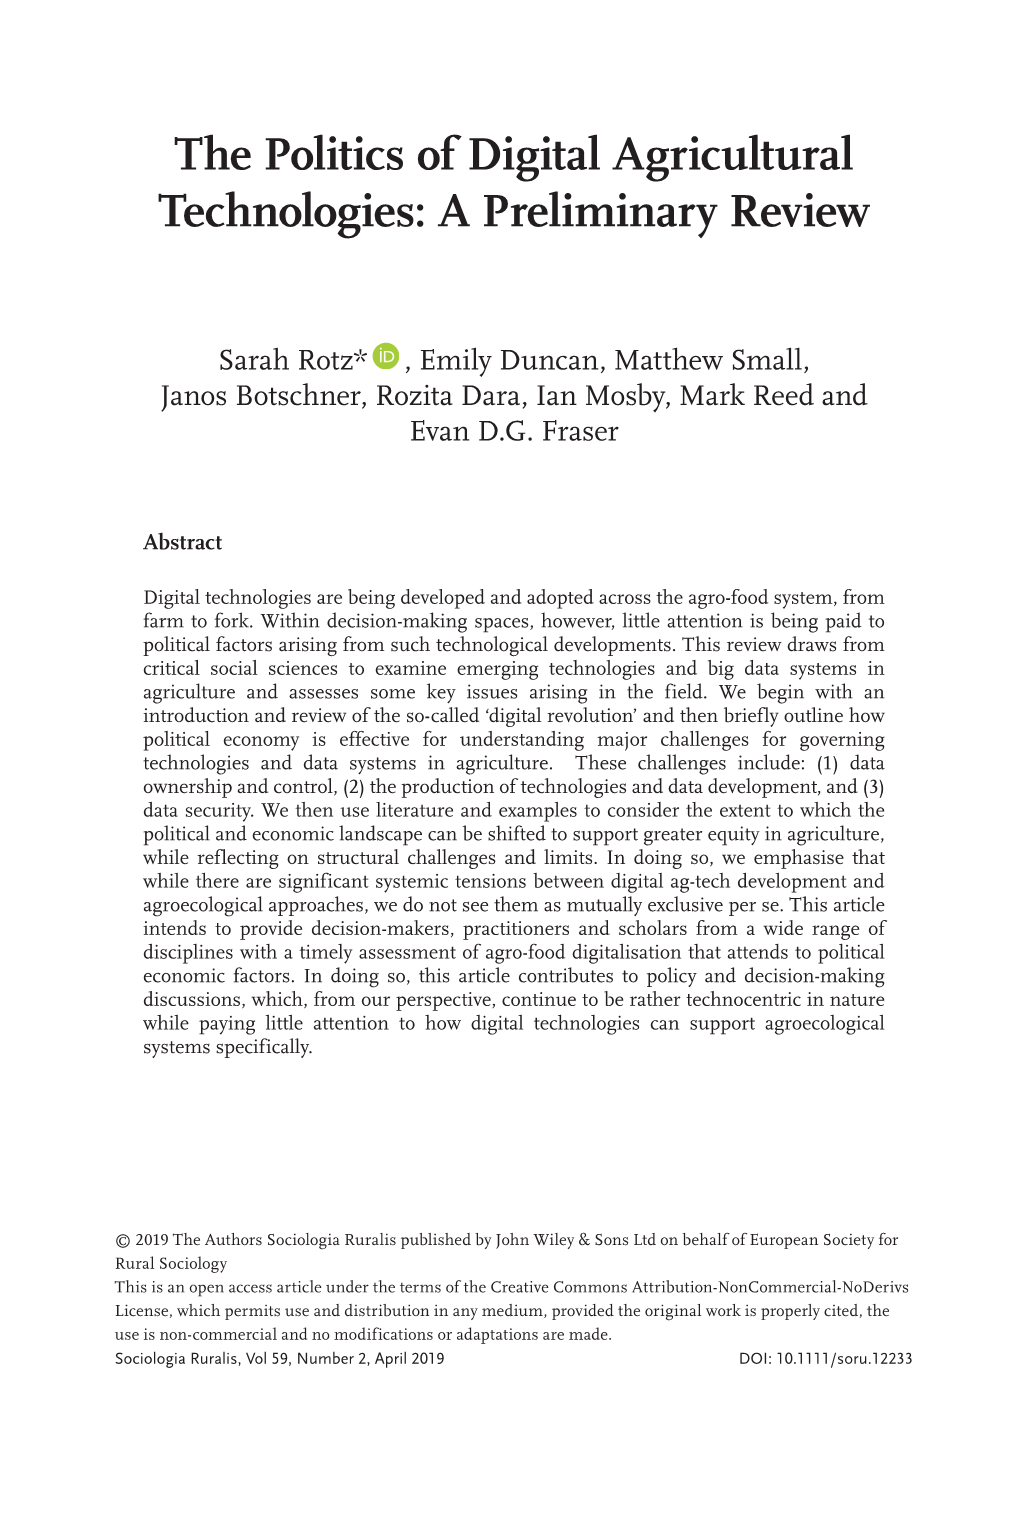 The Politics of Digital Agricultural Technologies: a Preliminary Review